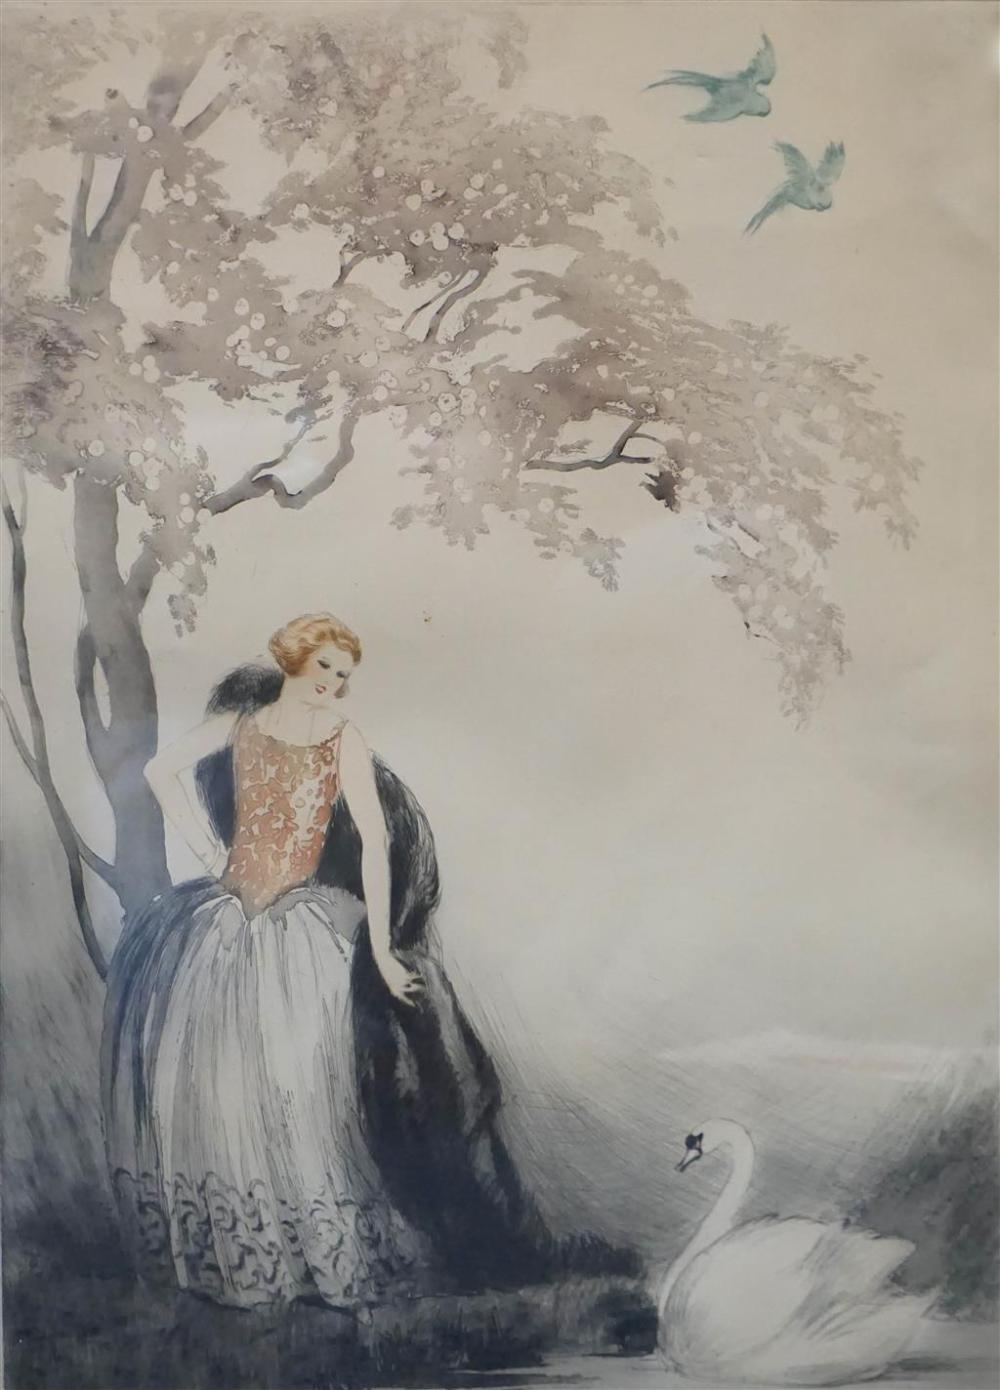 J HARDY WOMAN AND SWAN DRYPOINT 3285e5